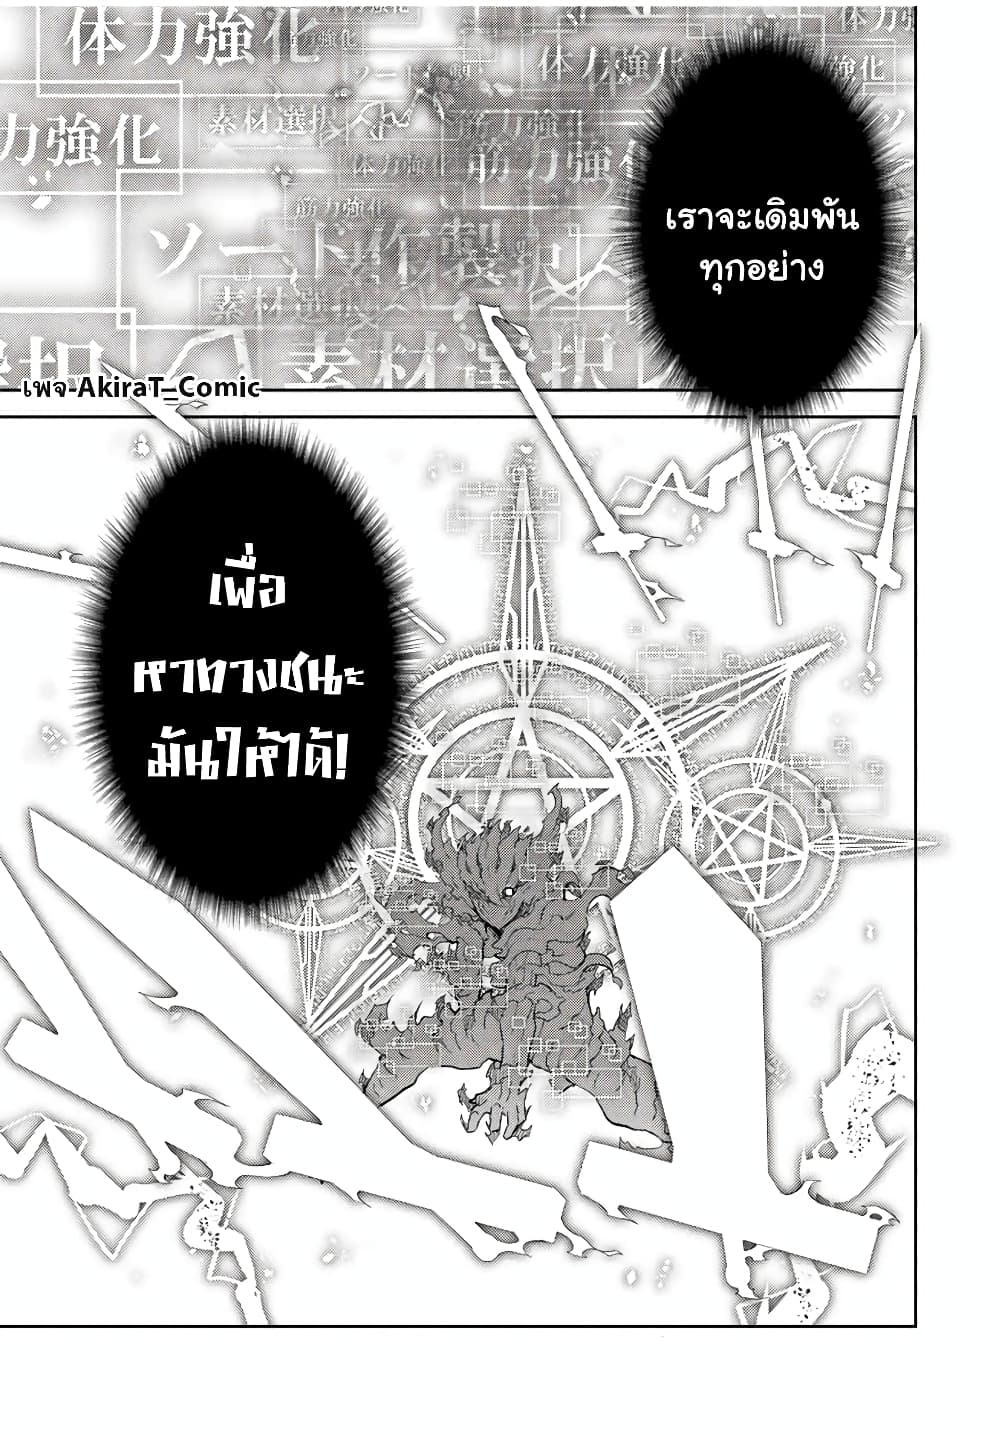 The Weakest Occupation "Blacksmith", but It's Actually the Strongest ช่างตีเหล็กอาชีพกระจอก? 56-56